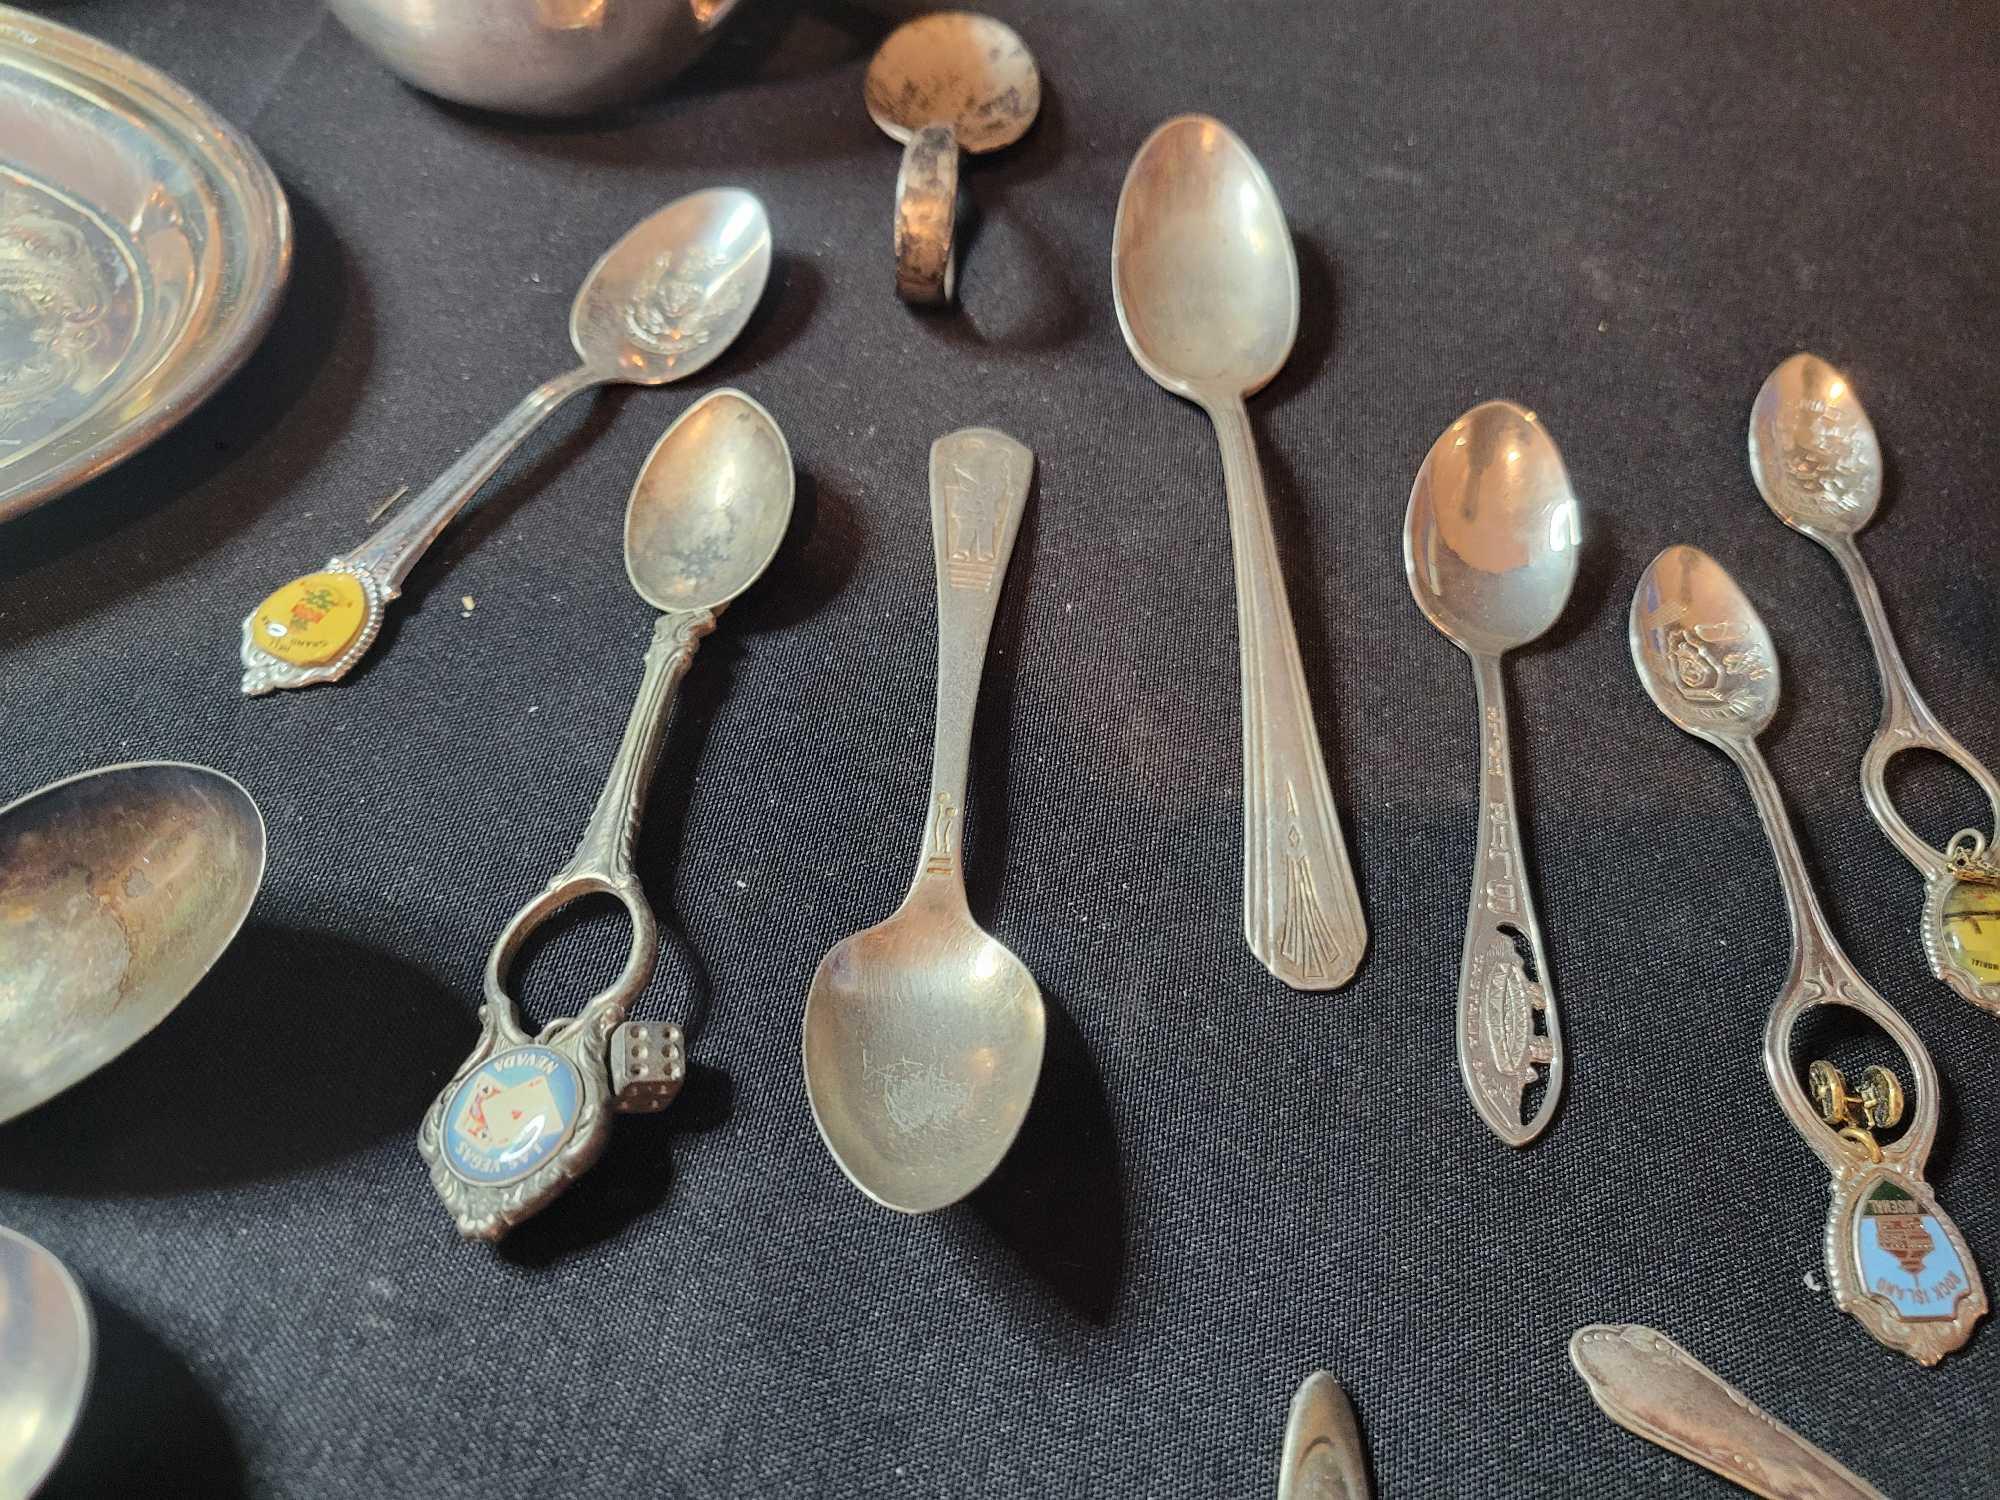 Group of mostly plated flatware, one piece marked sterling and additional spoon believed to be